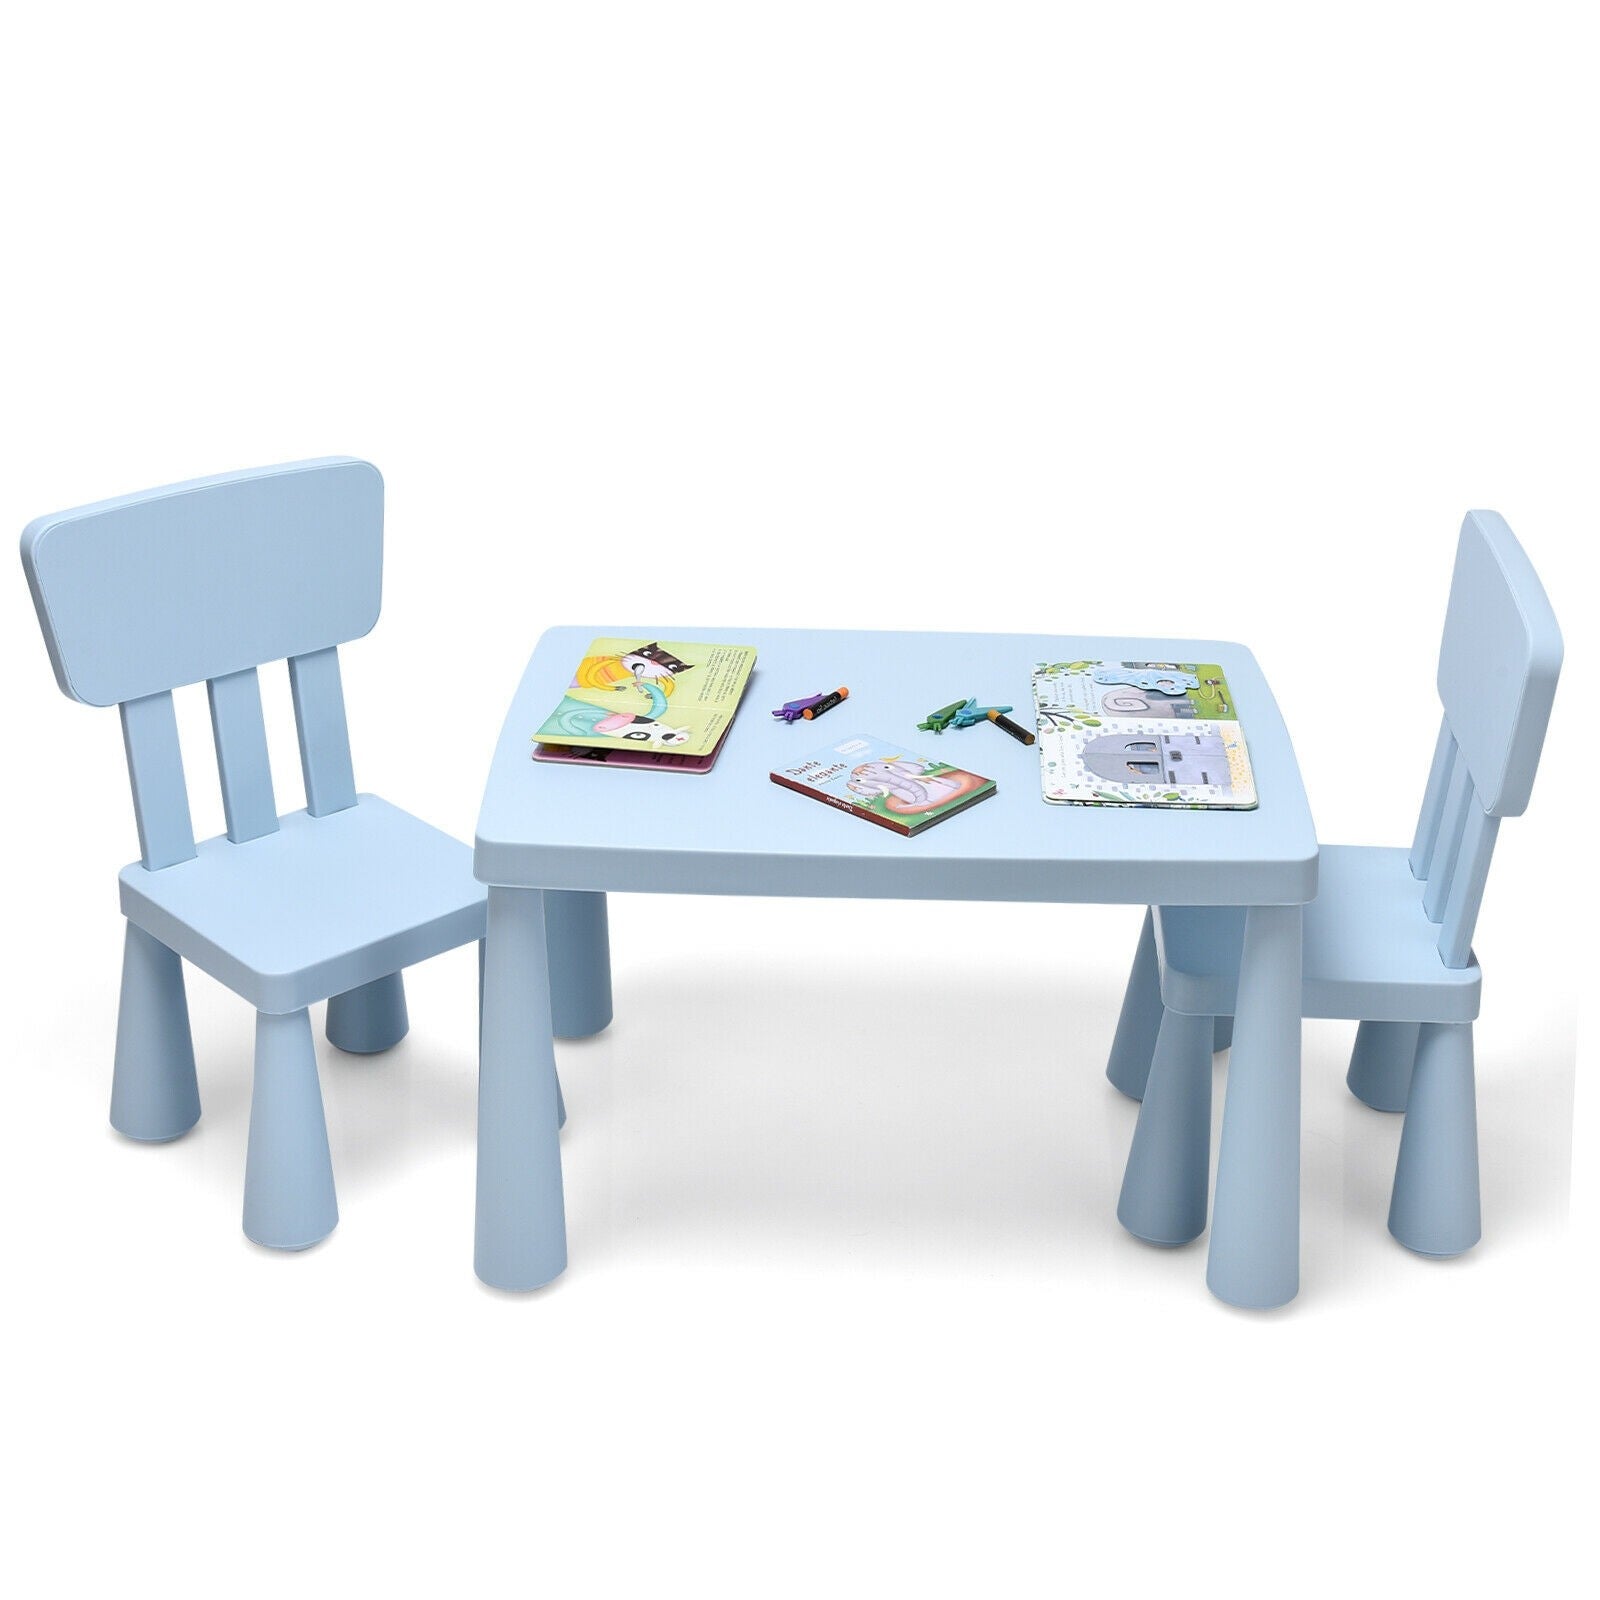 Costzon Kids Table and Chair Set, Kids Mid-Century Modern Style Table Set  for Toddler Children, Kids Dining Table and Chair Set, 5-Piece Set (White